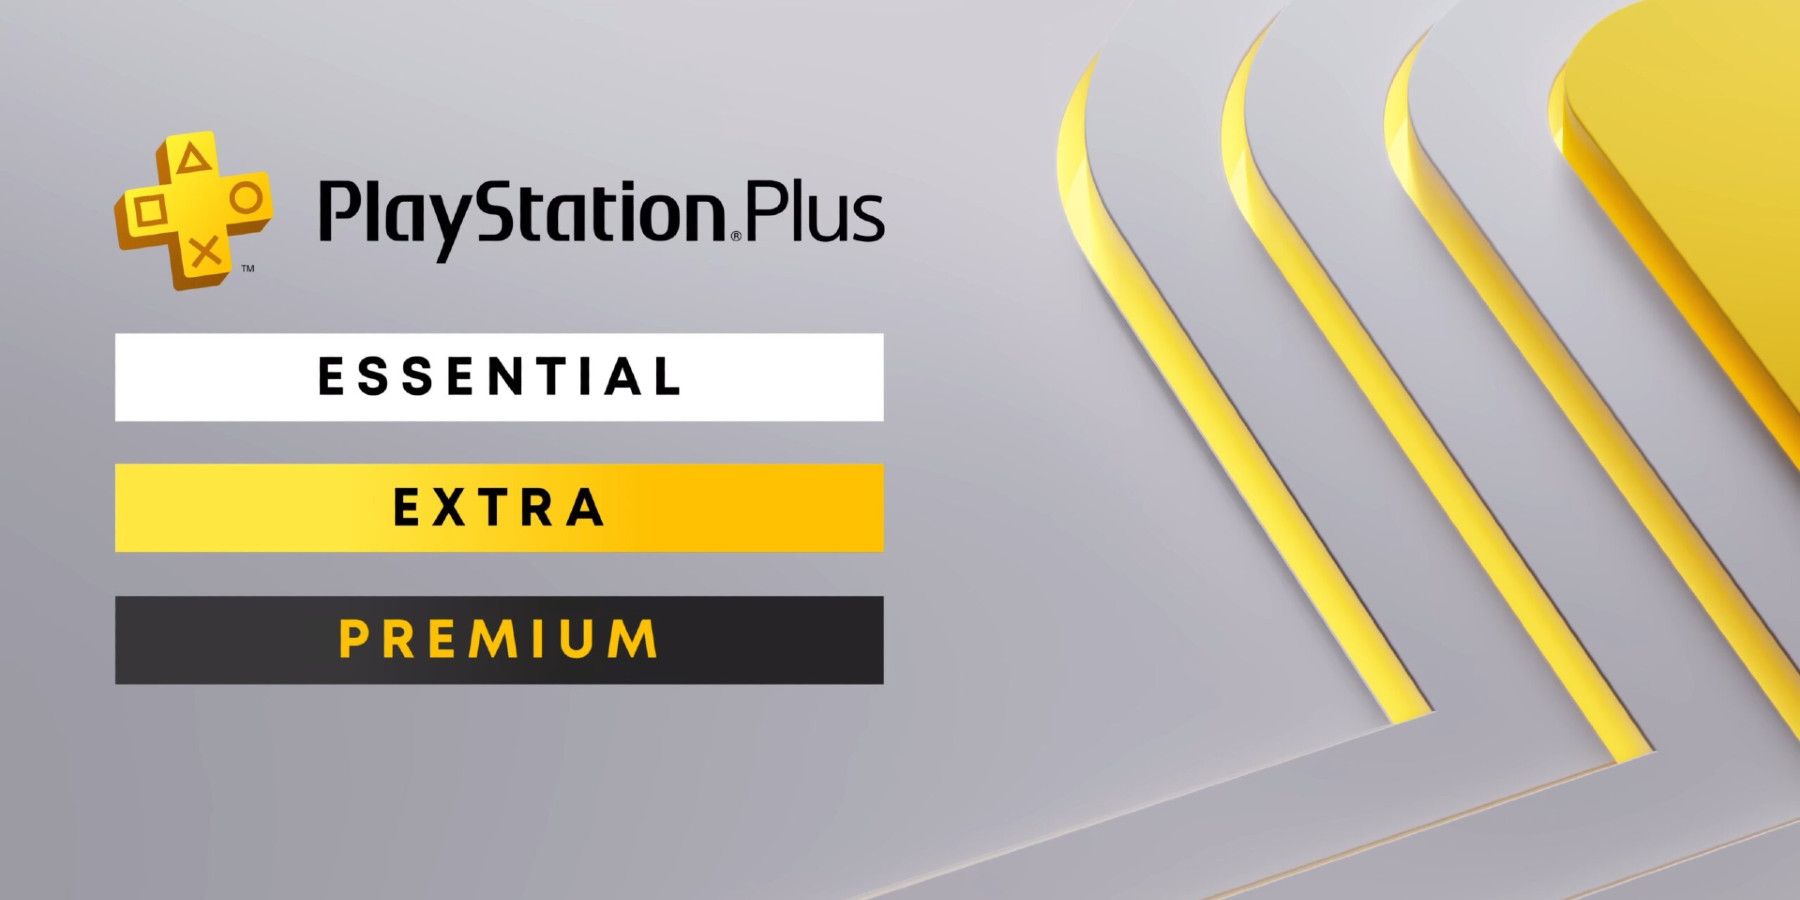 New Playstation Plus Tiers